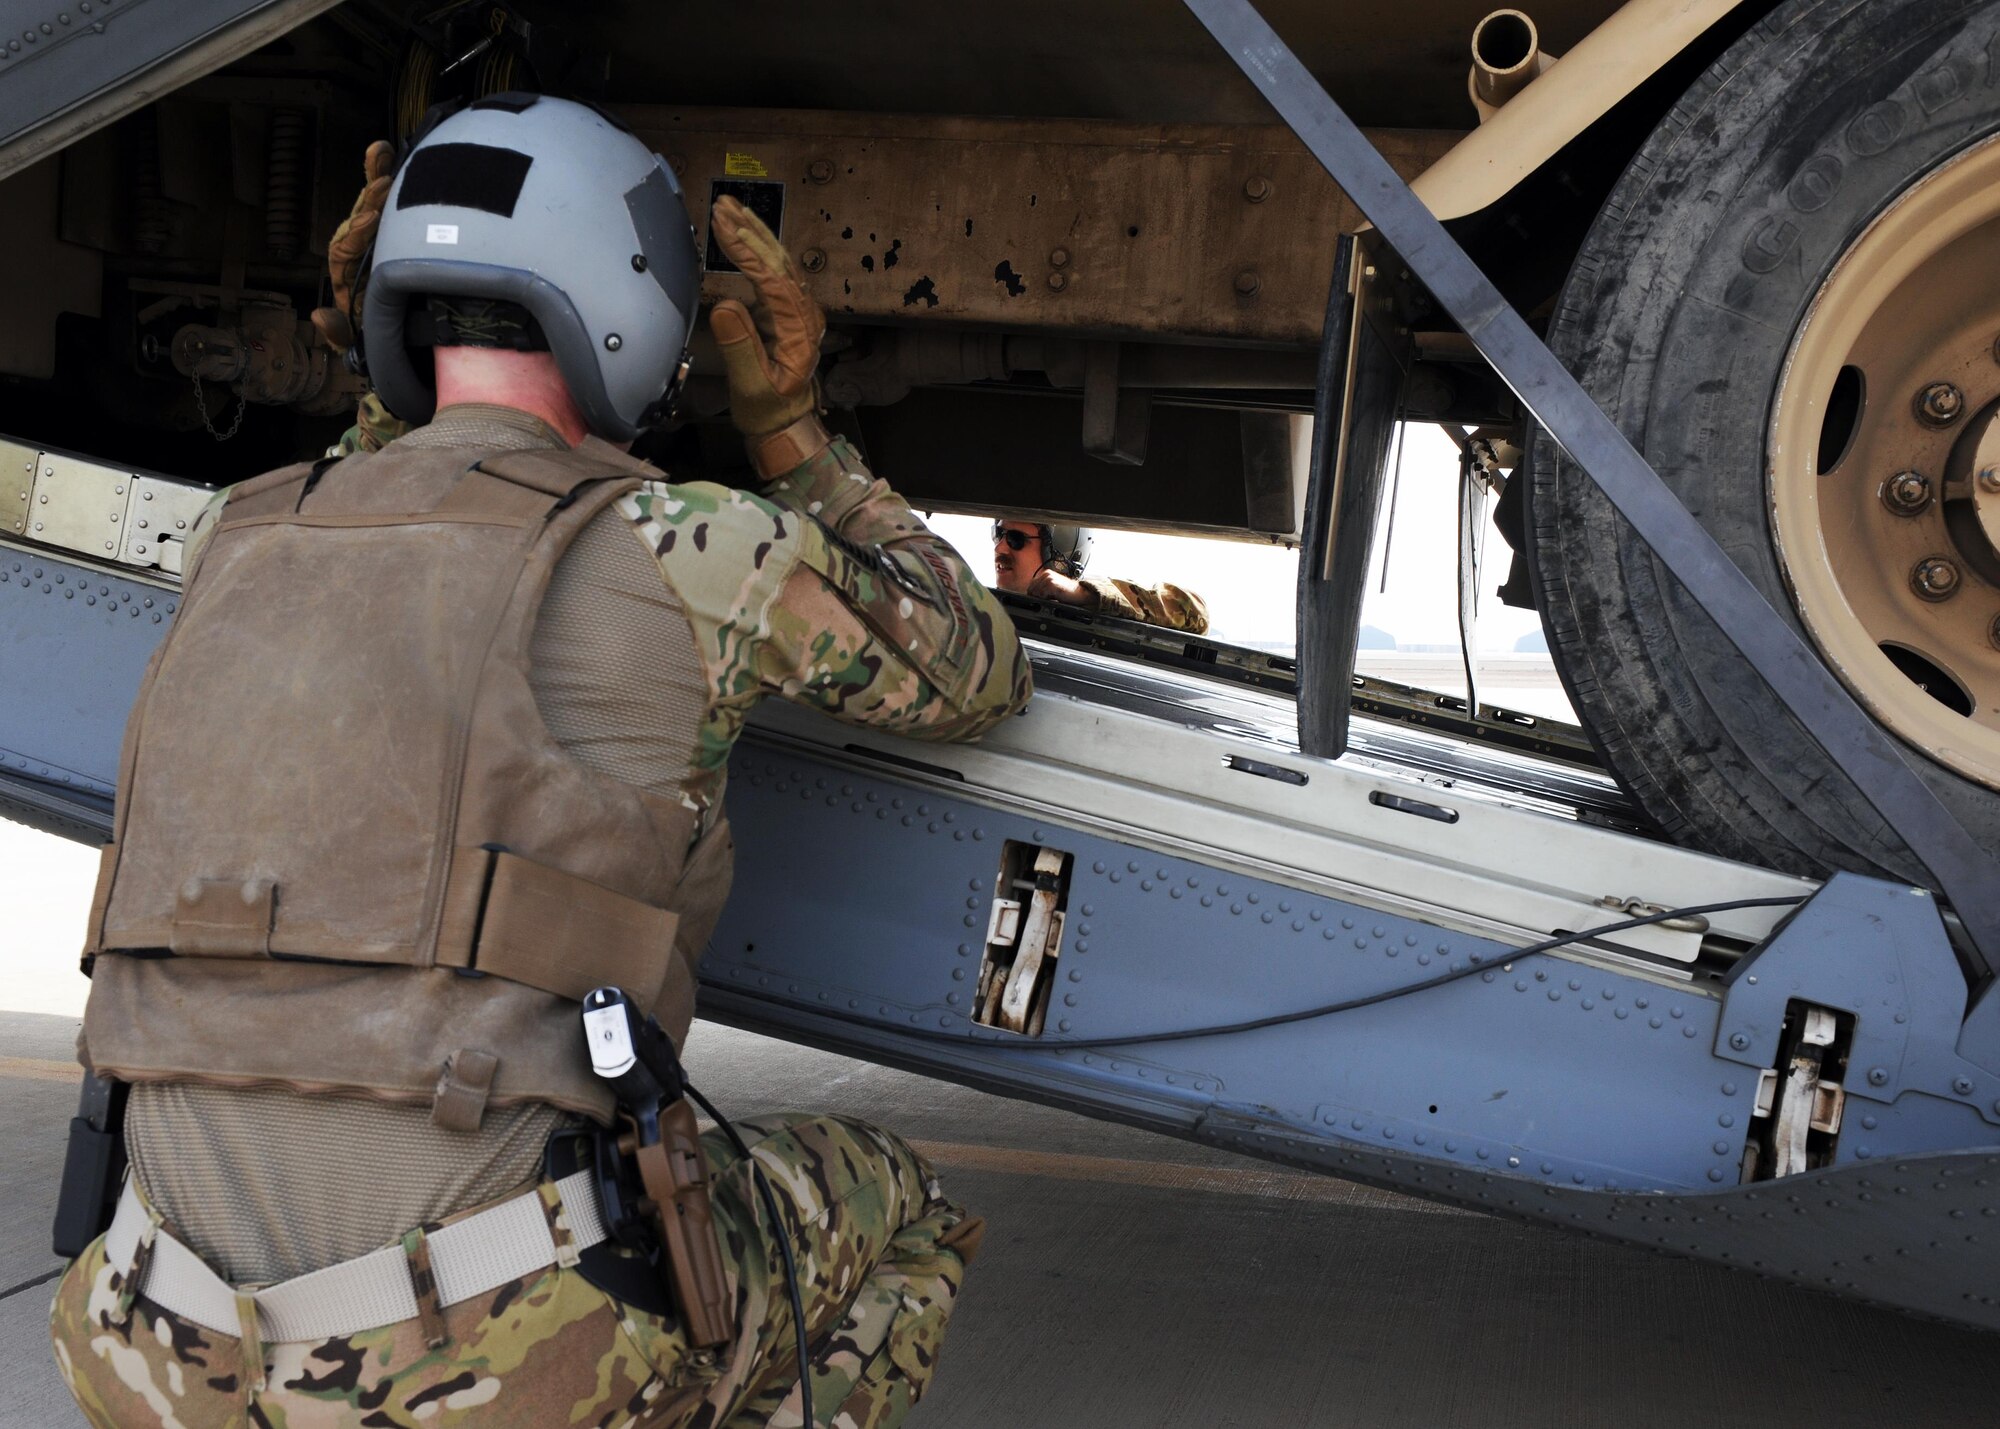 U.S. Air Force Airmen assigned to the 774th Expeditionary Airlift Squadron act as spotters as an R-11 fuel truck is loaded onto a C-130J Super Hercules aircraft during a redeployment mission at an undisclosed location in the Air Force Central Command area of responsibility March 15, 2015. The ability to forward deploy mission critical equipment, such as the R-11, to key sites throughout the AOR is more imperative than ever before as the Air Force reduces its footprint in the region. (U.S. Air Force photo by Staff Sgt. Whitney Amstutz)